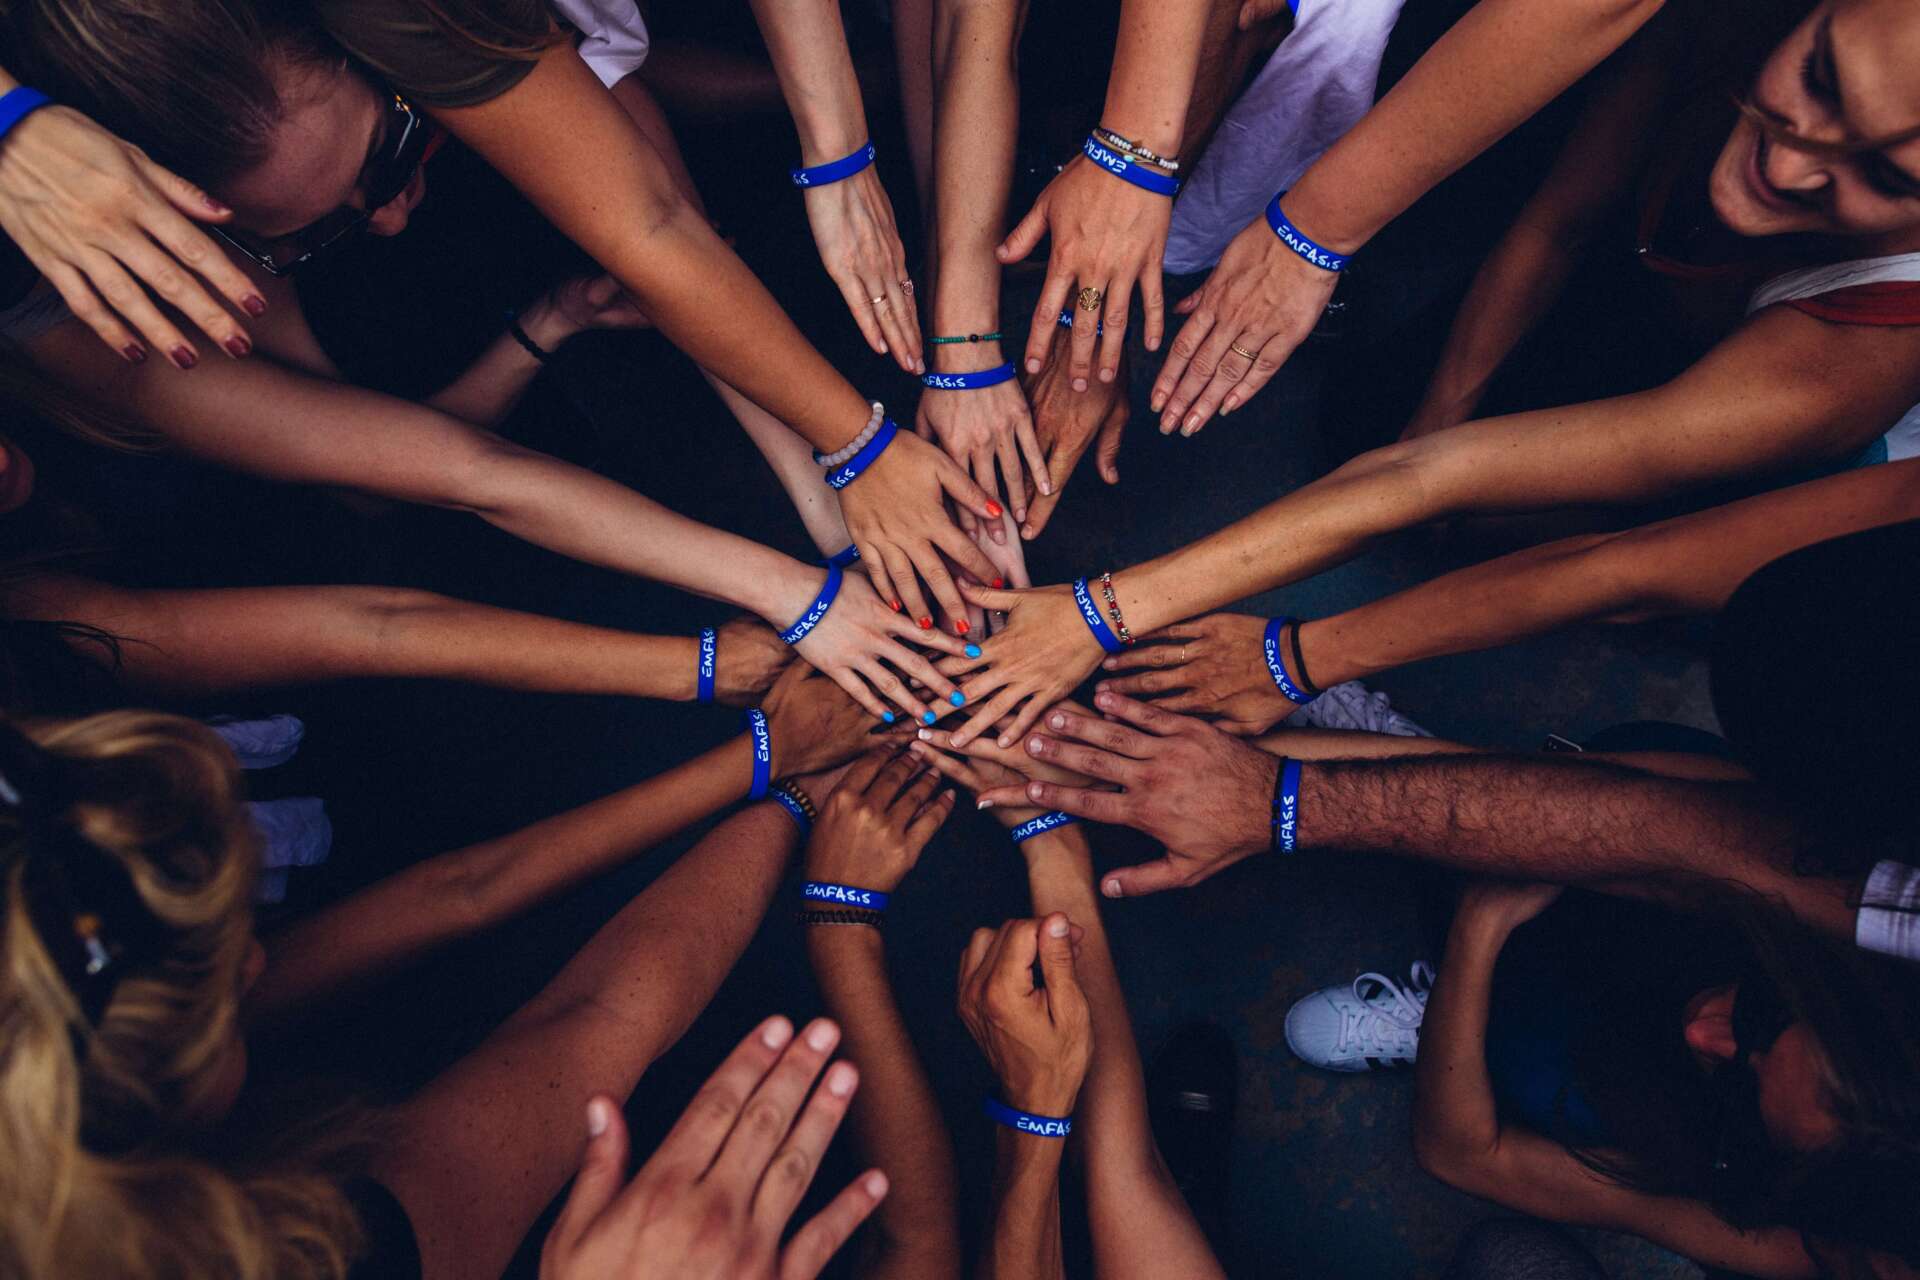 A group of people reaching with one hand into the center, hands touching in the middle